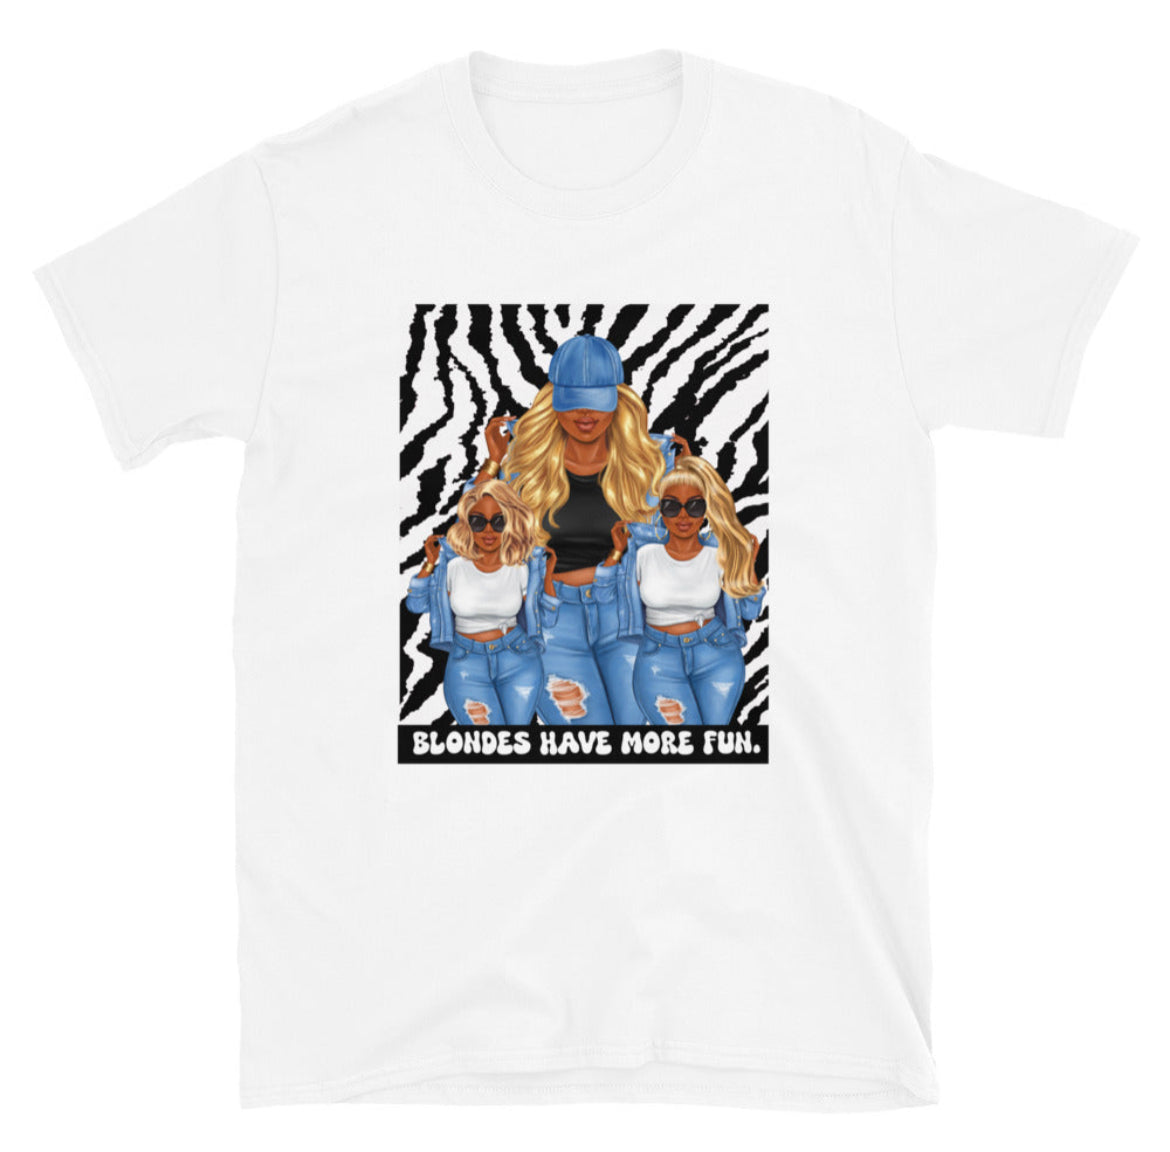 Blondes Have More Fun T-Shirt